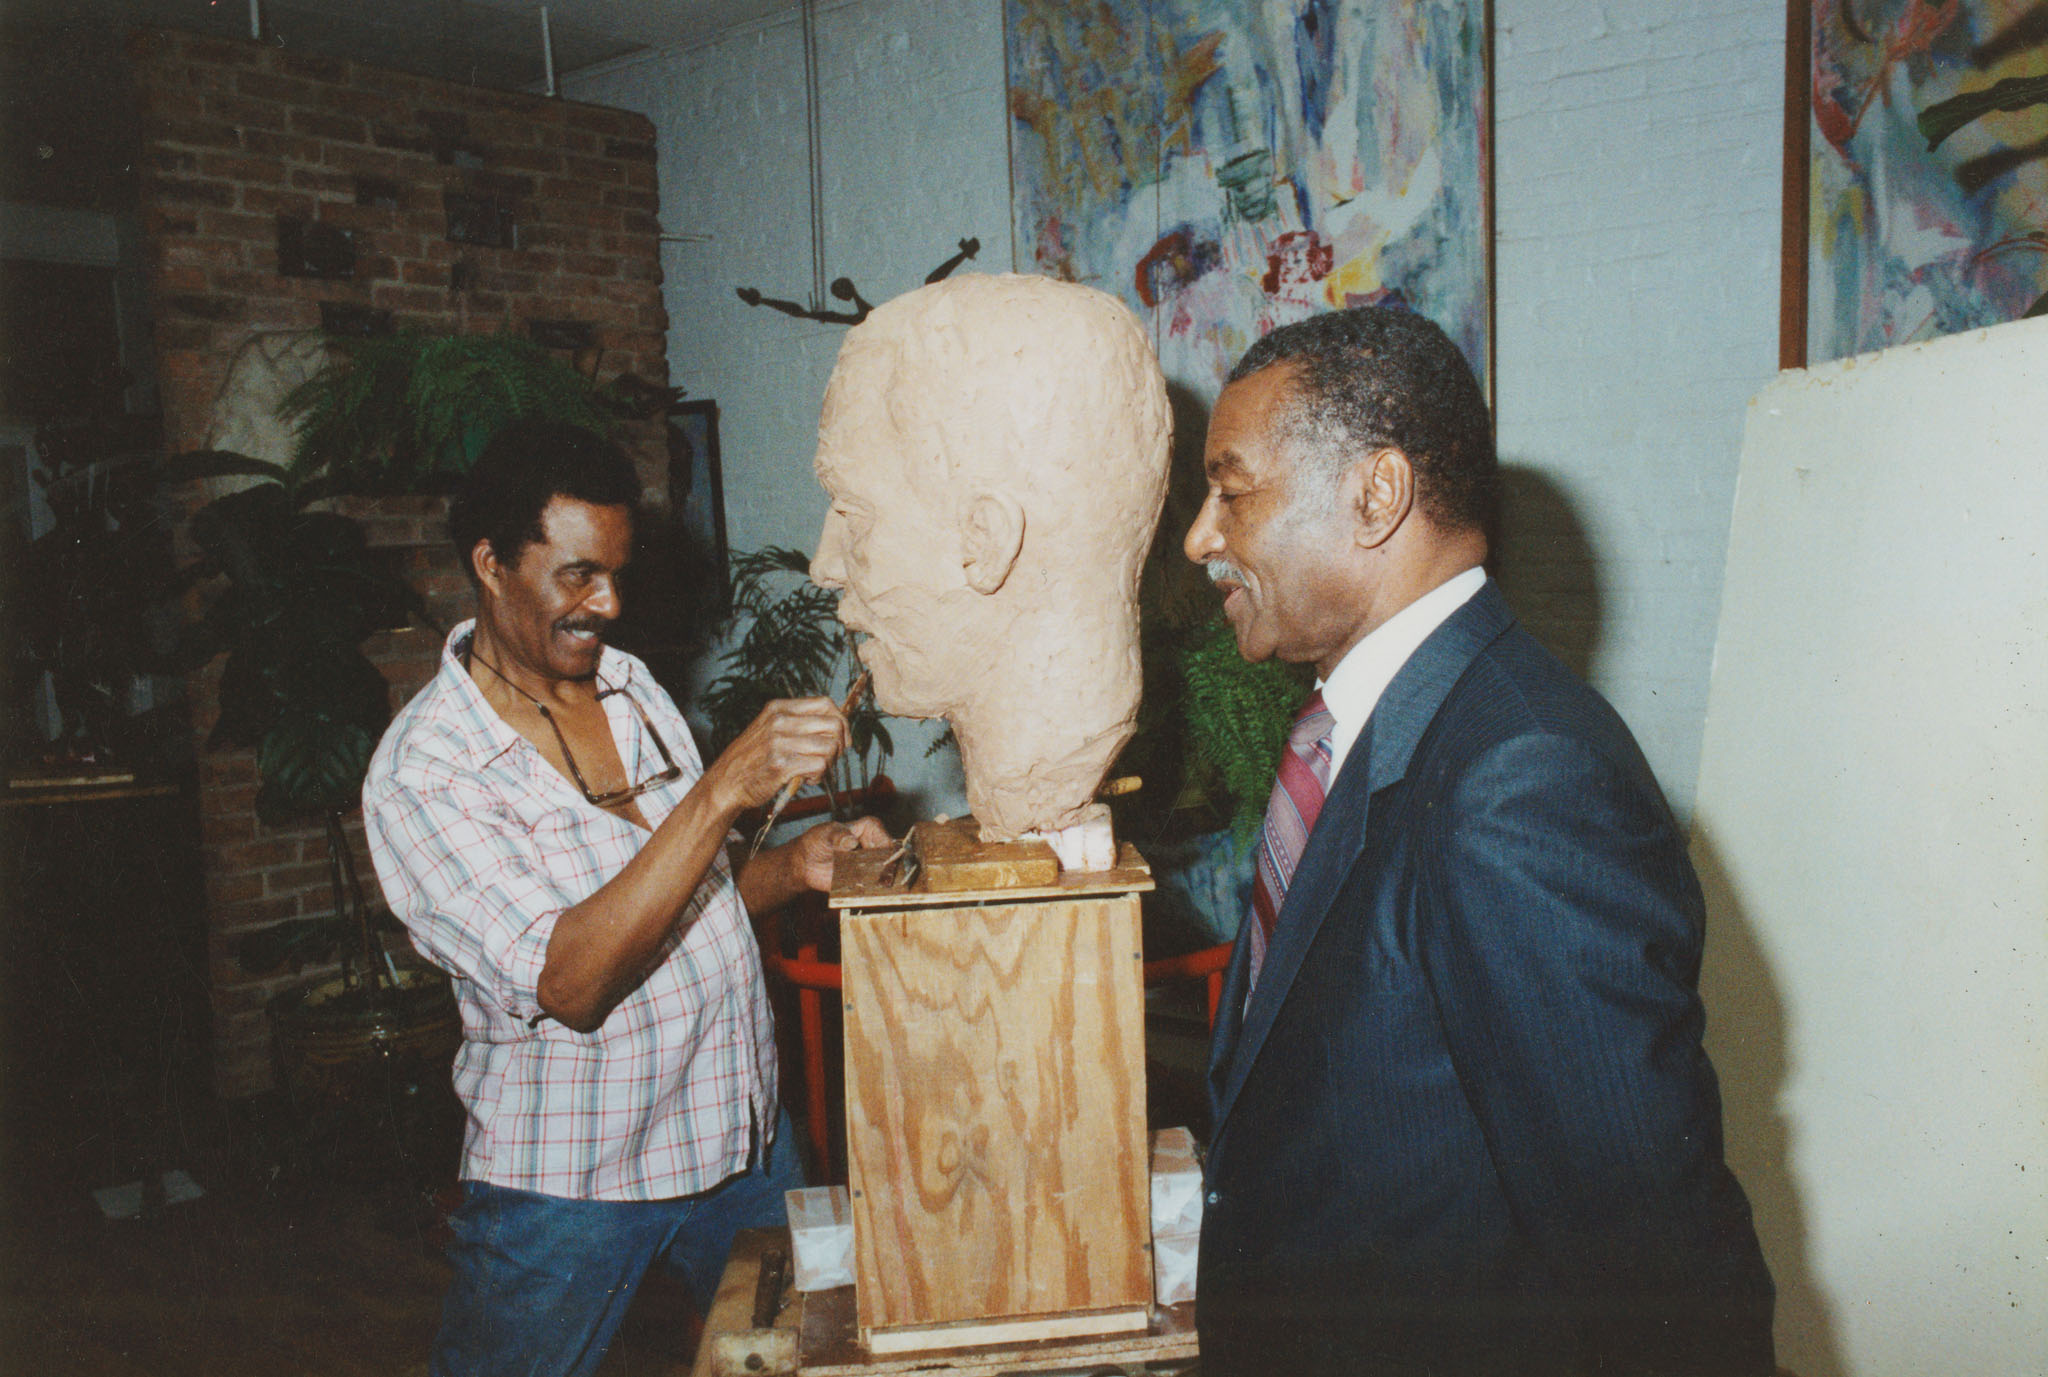 A sculptor working on a bust with a person modeling.